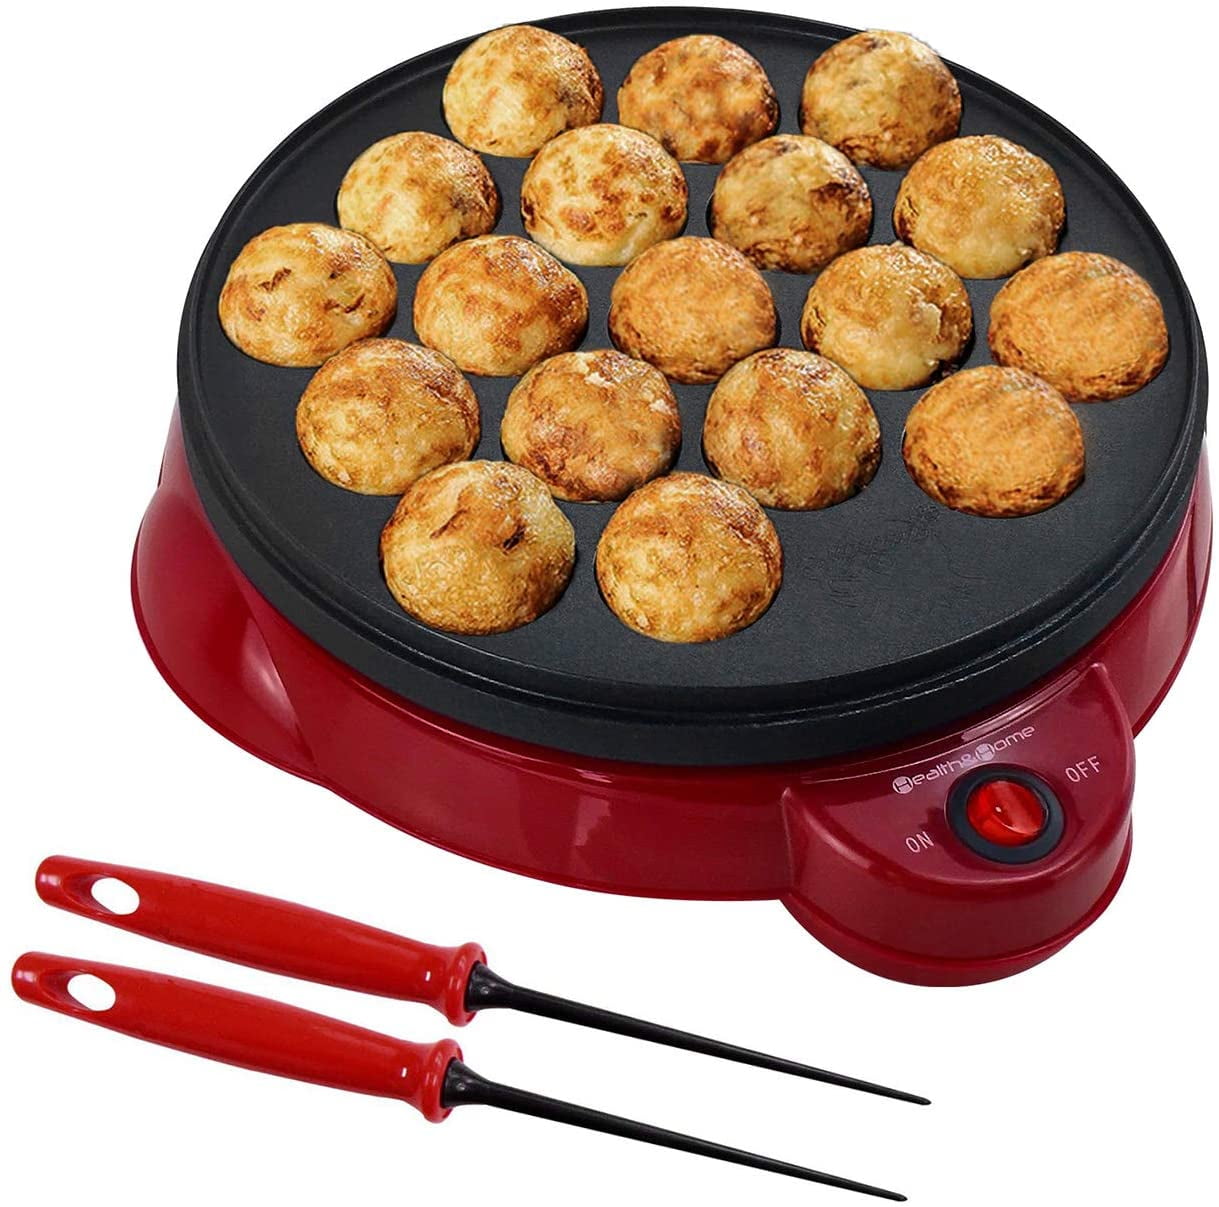 Details about   Japanese TAKOYAKI Grill pan maker cooking plate stove machine ITY-18A-R Japan 